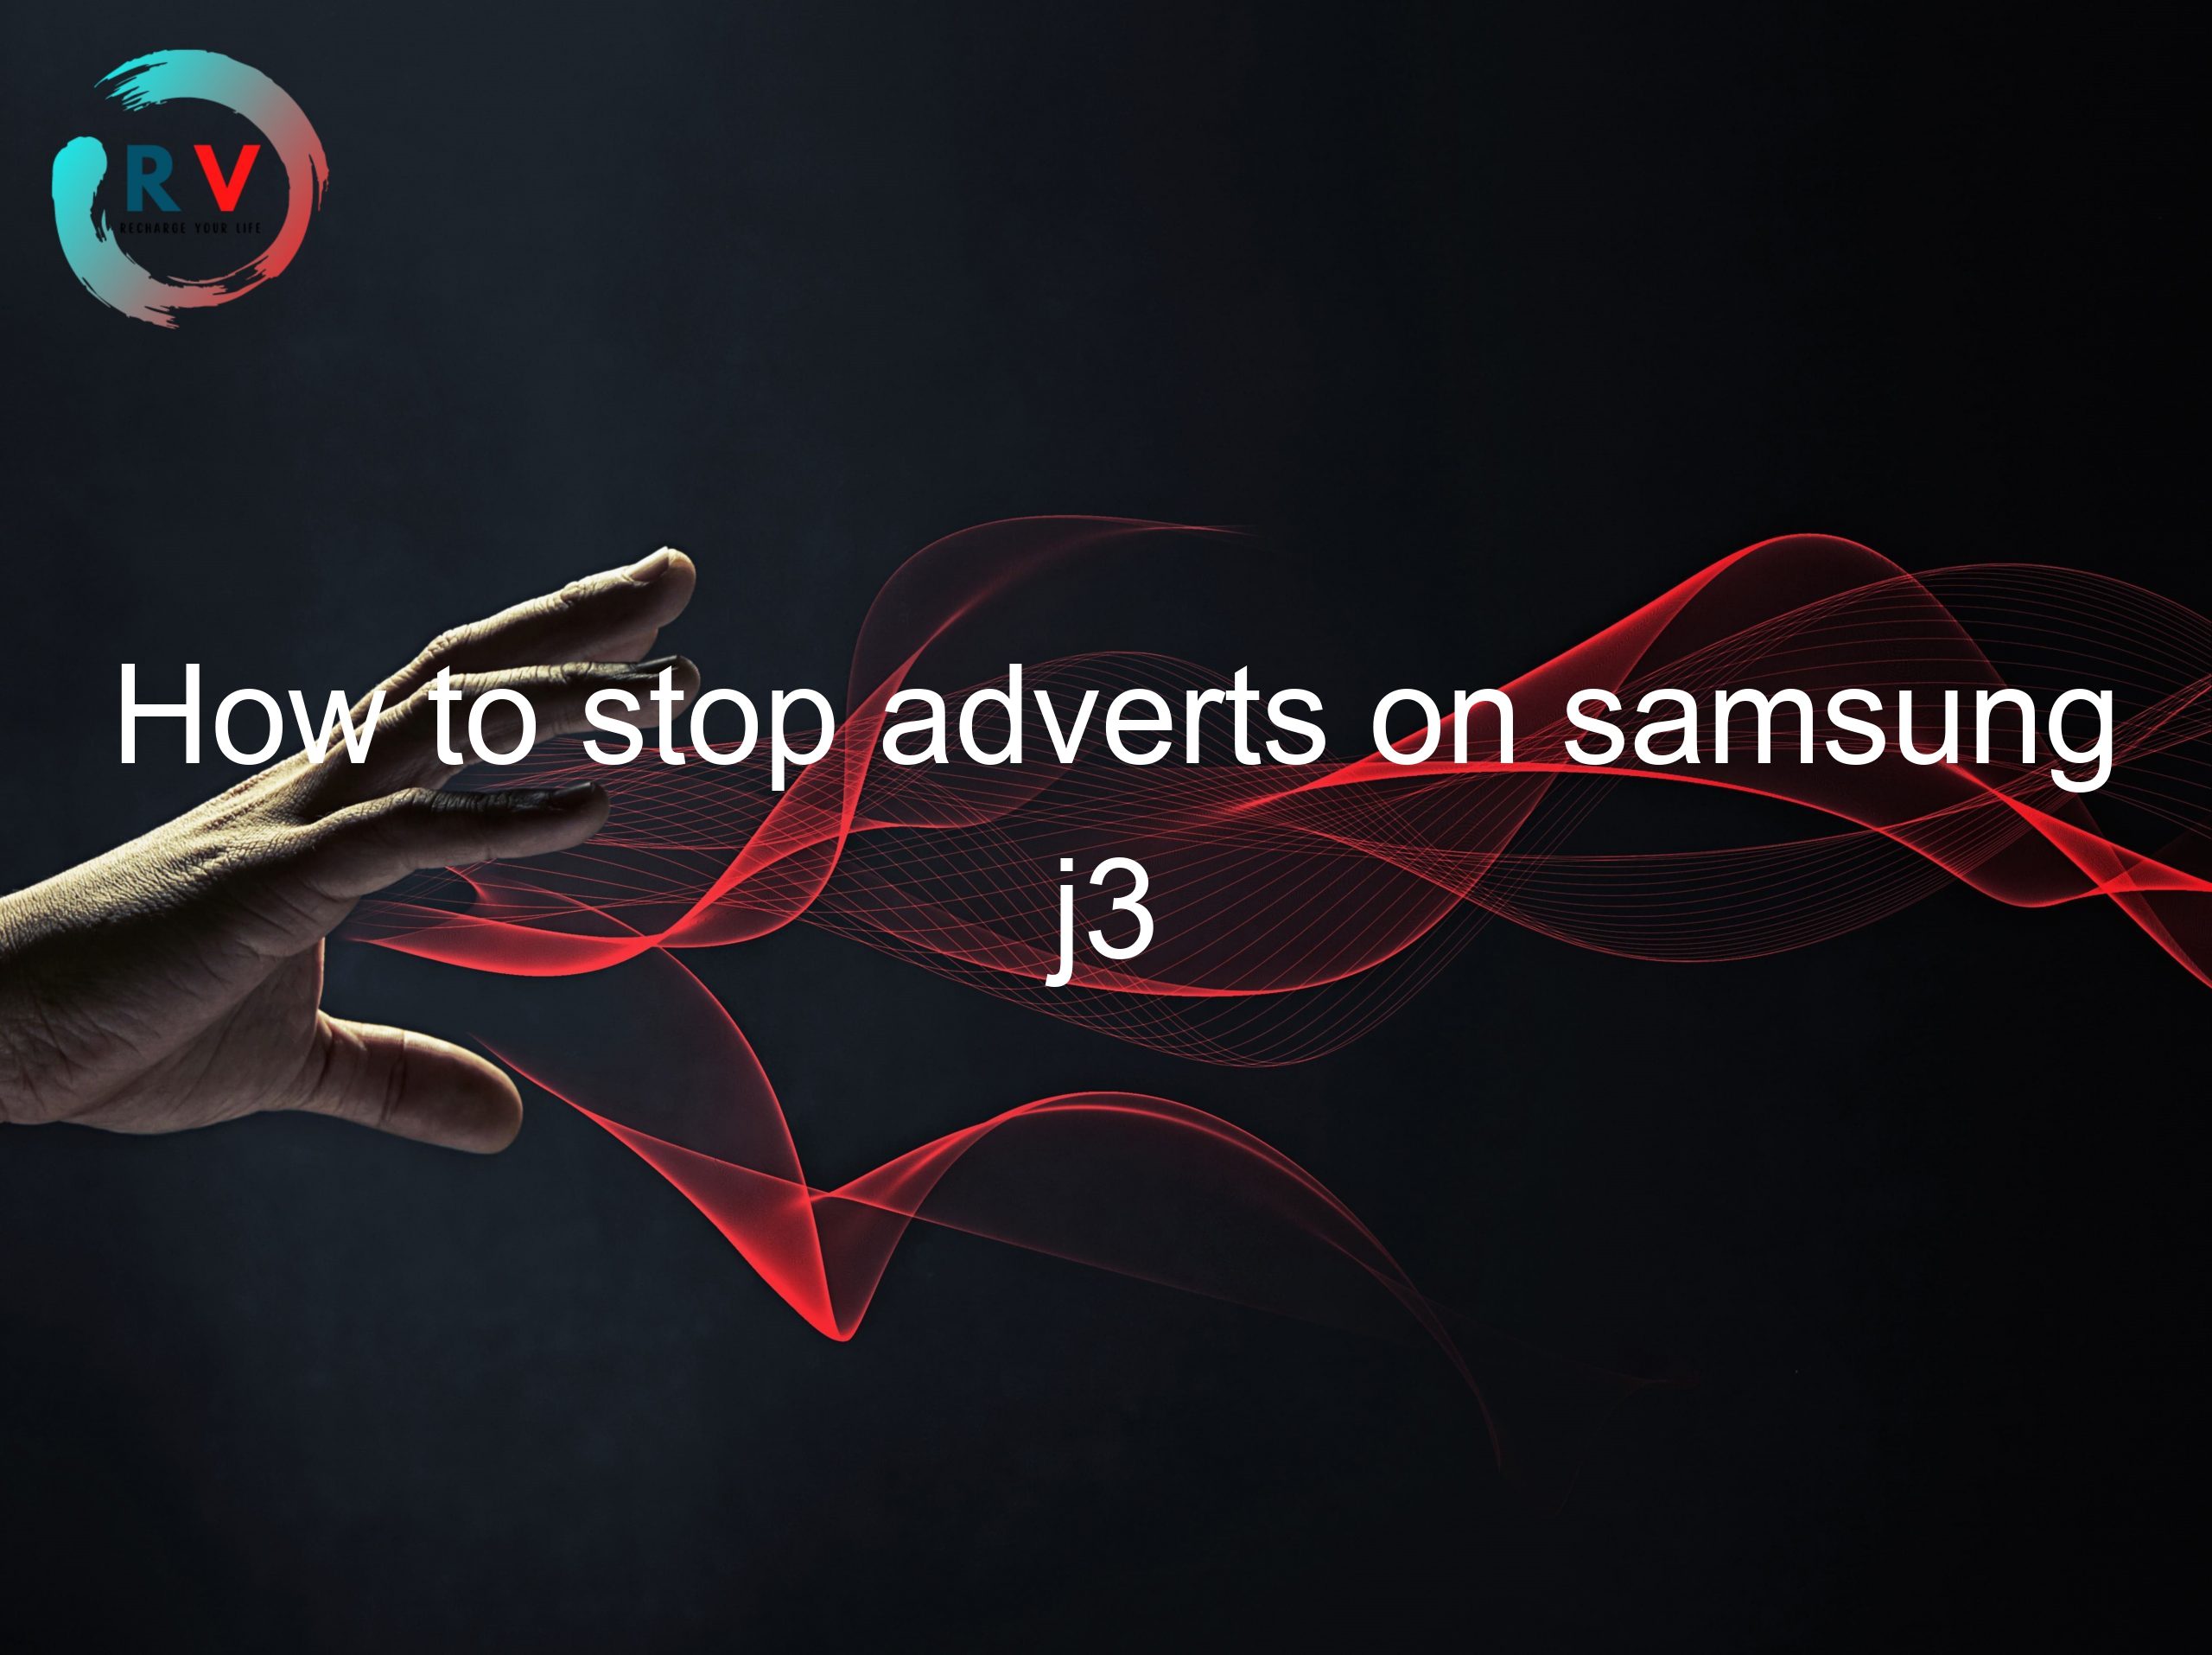 How to stop adverts on samsung j3